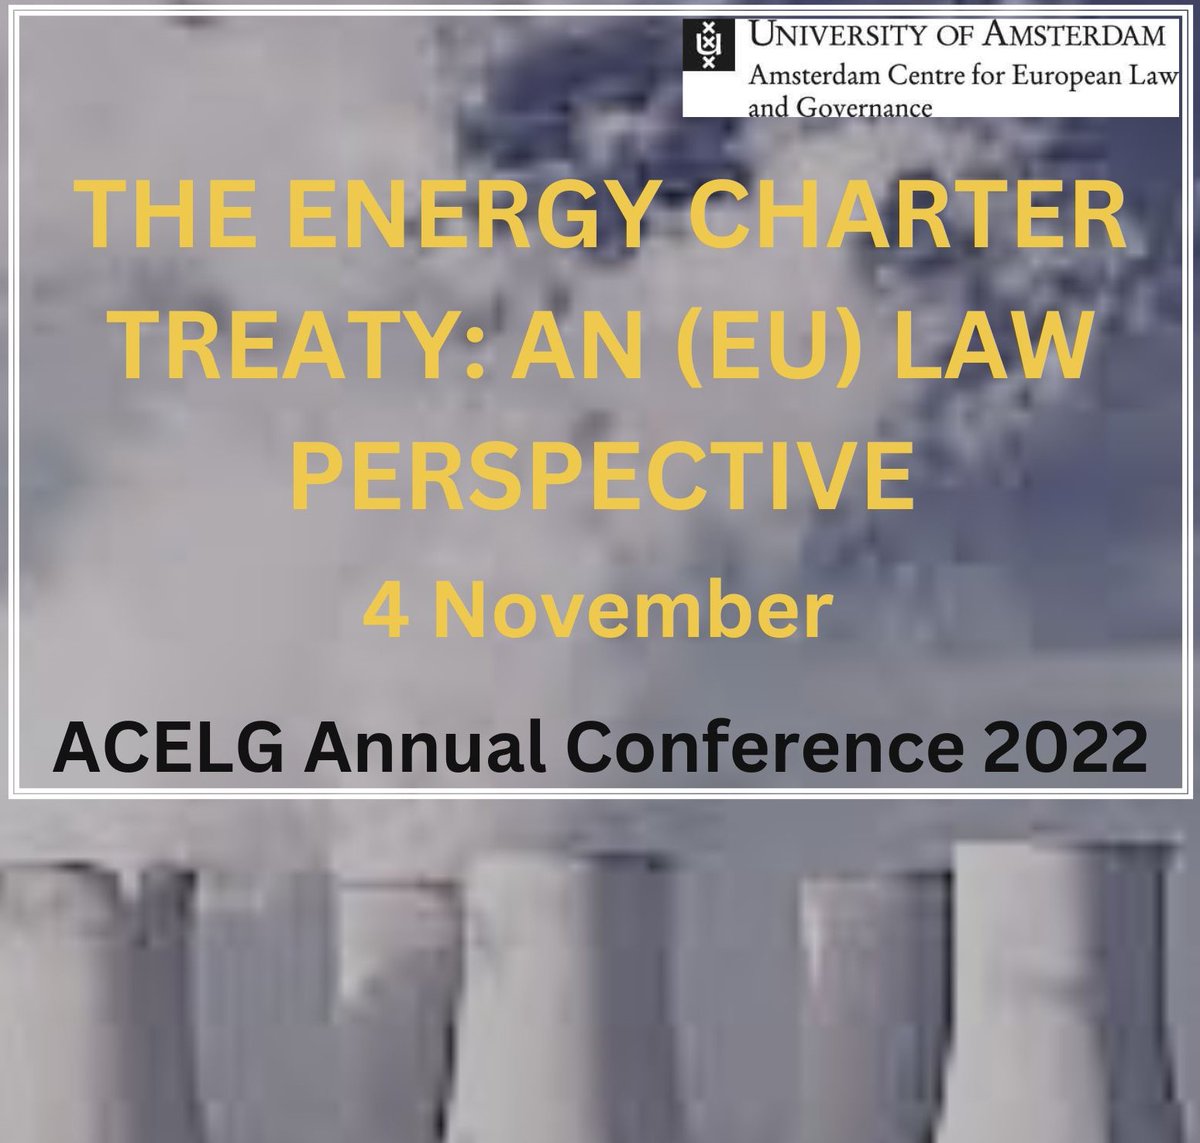 Friday 4 November, @ACELG_UvA is holding a conference about the ECT and its modernization in relation to the energy transition. 🔥The Energy Charter Treaty: An EU (Law) Perspective Register here to join us online👇 acelg.uva.nl/content/events…